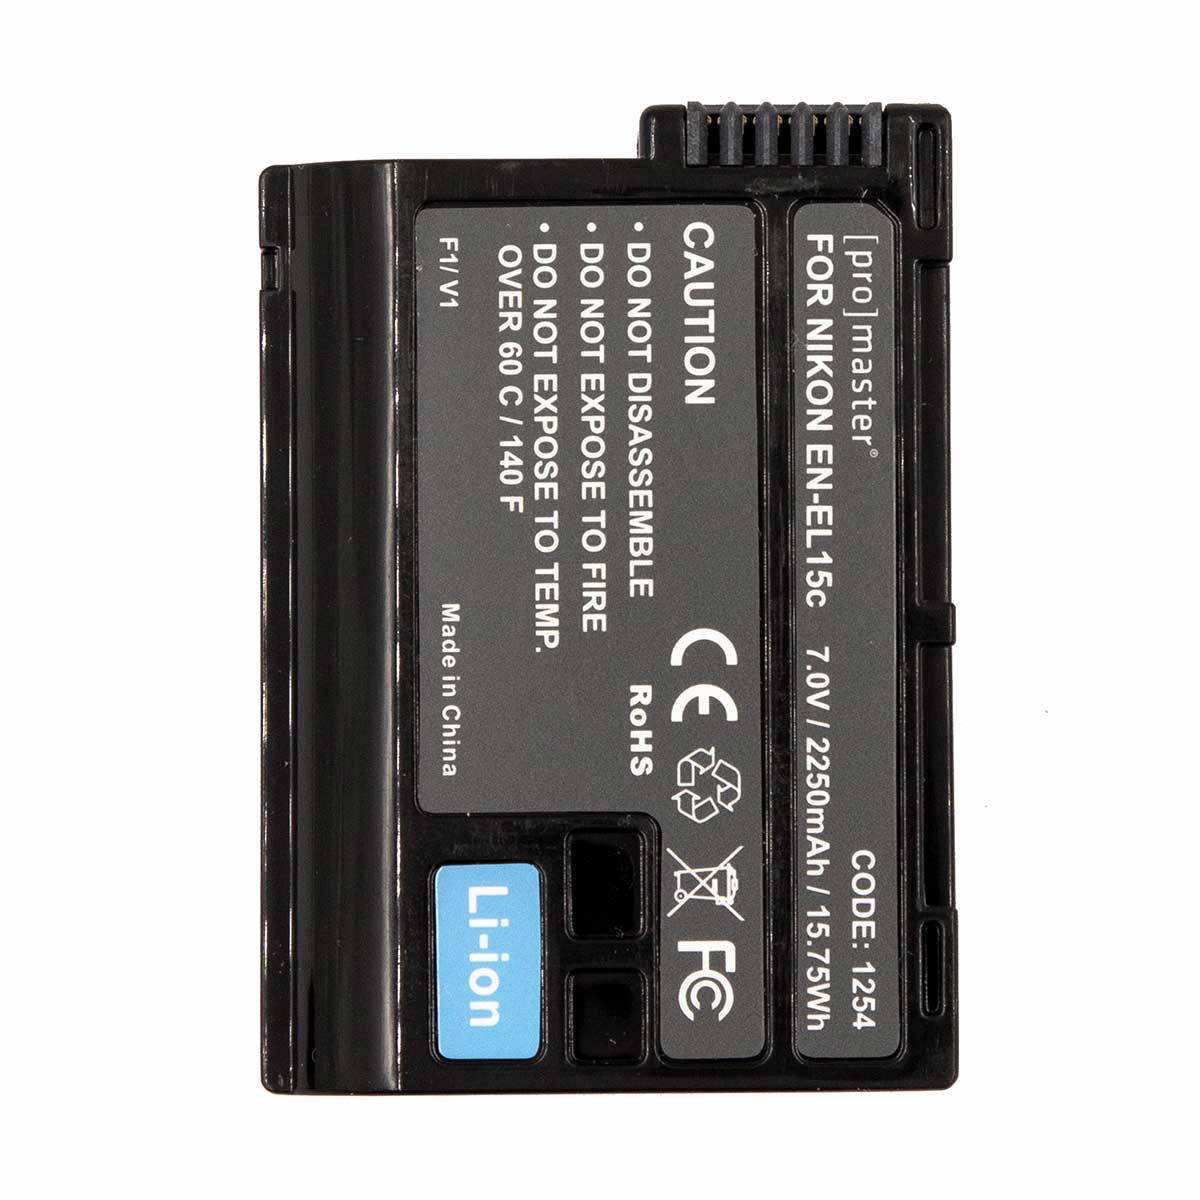 ProMaster EN-EL15c Battery and Charger Kit for Nikon